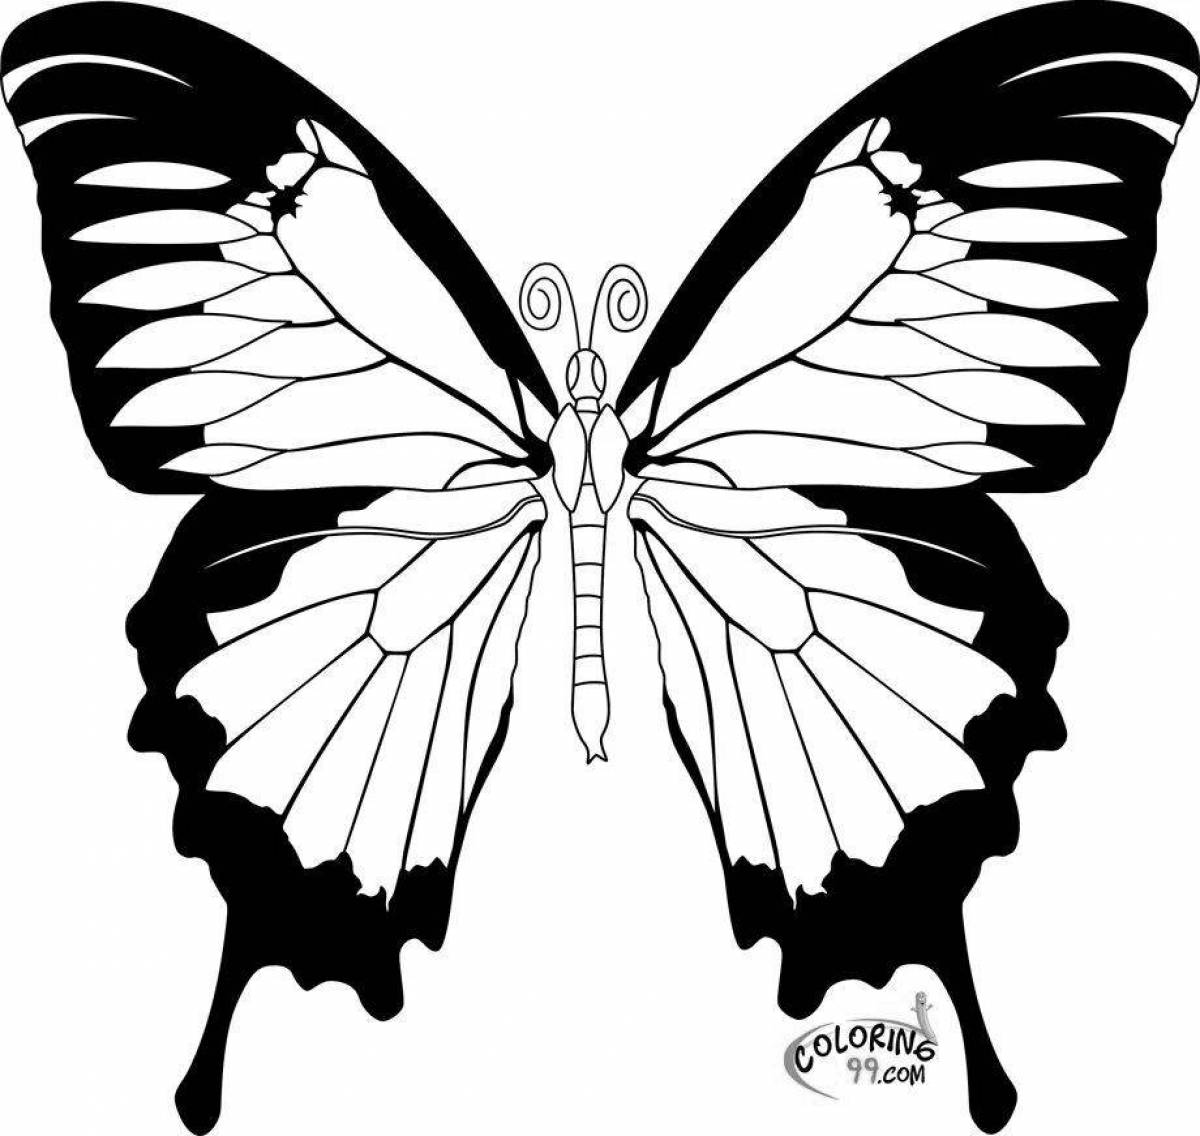 Coloring book elegant black and white butterflies